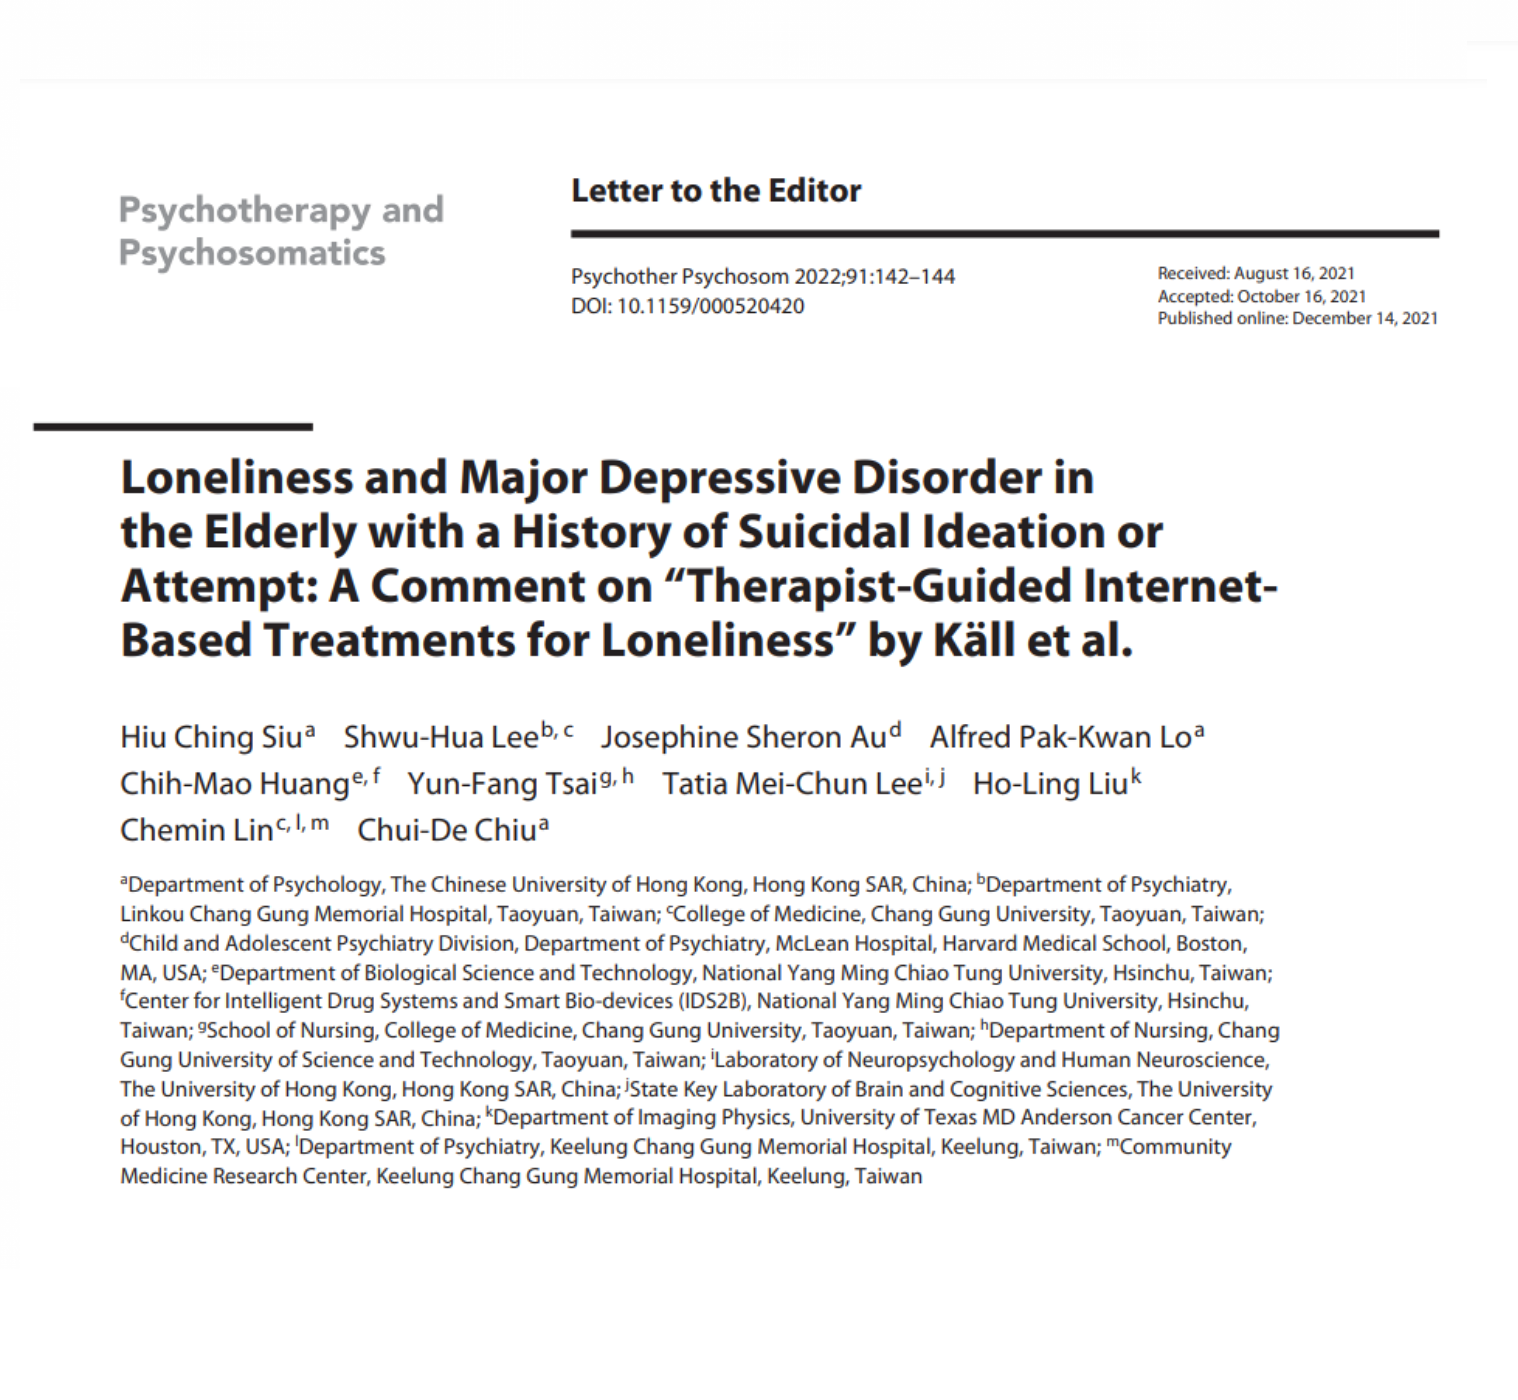 Loneliness and Major Depressive Disorder in the Elderly